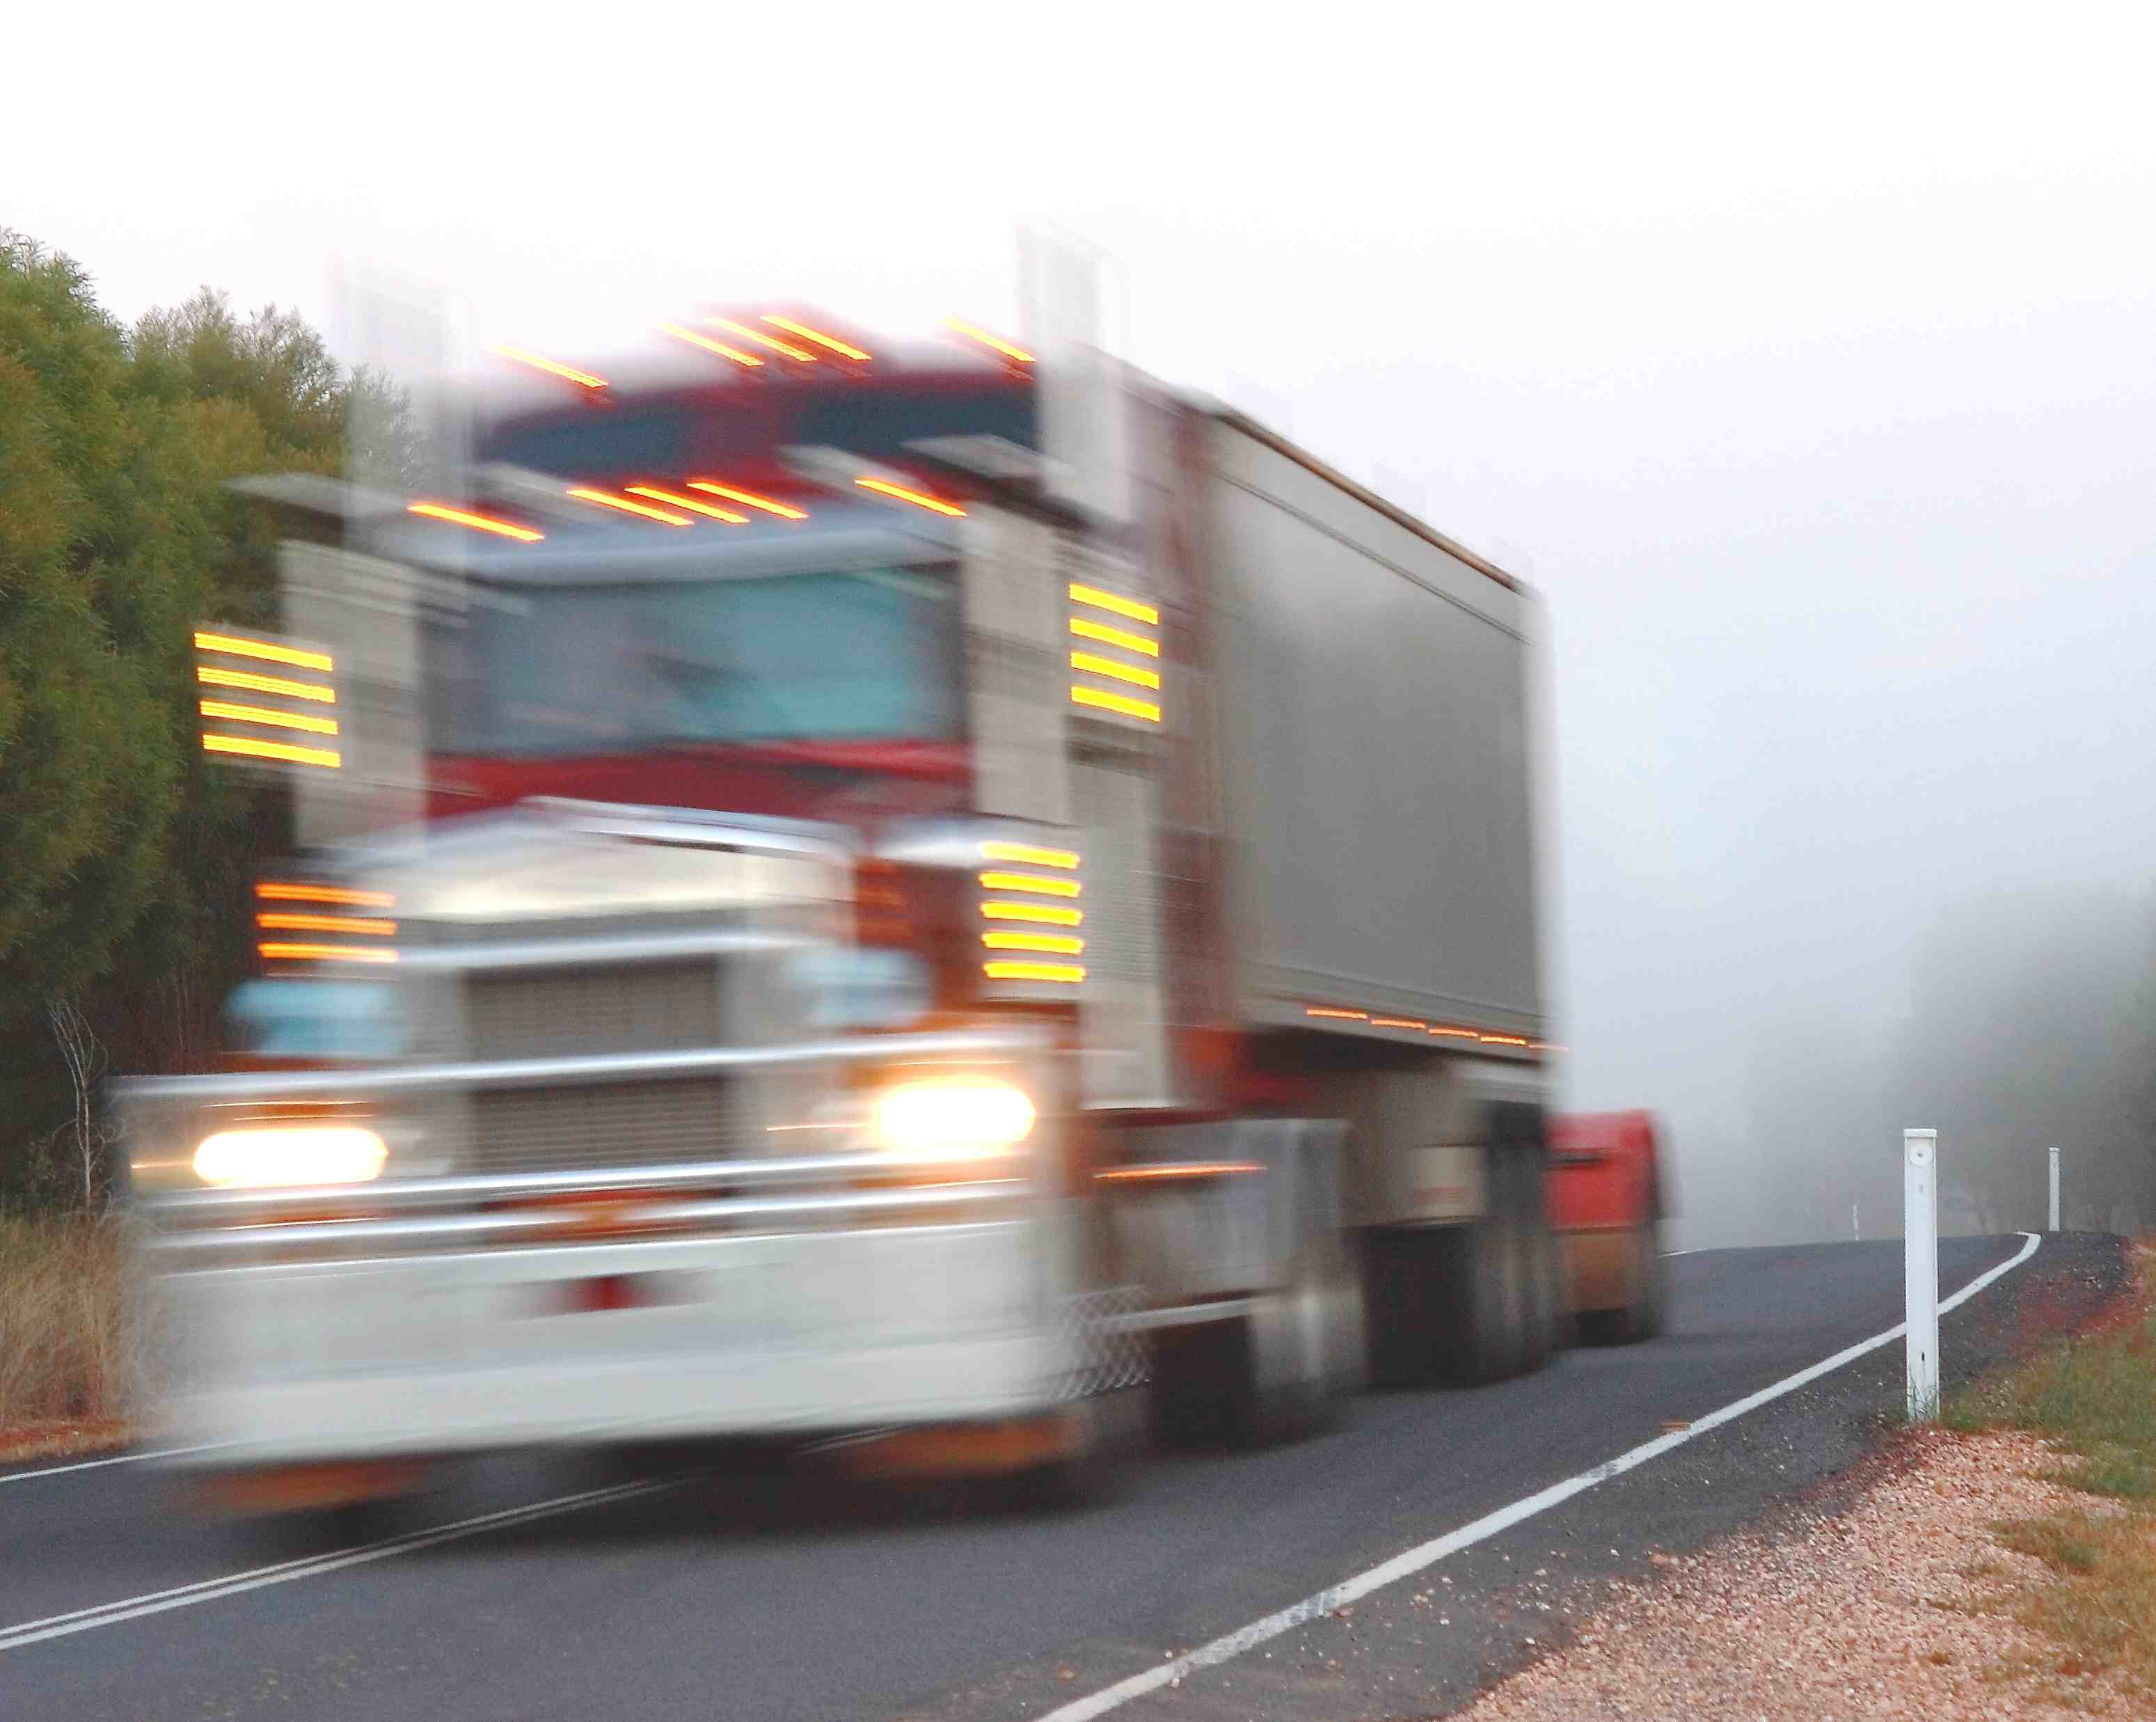 The large size and weight of a truck impacts how quickly it can brake.